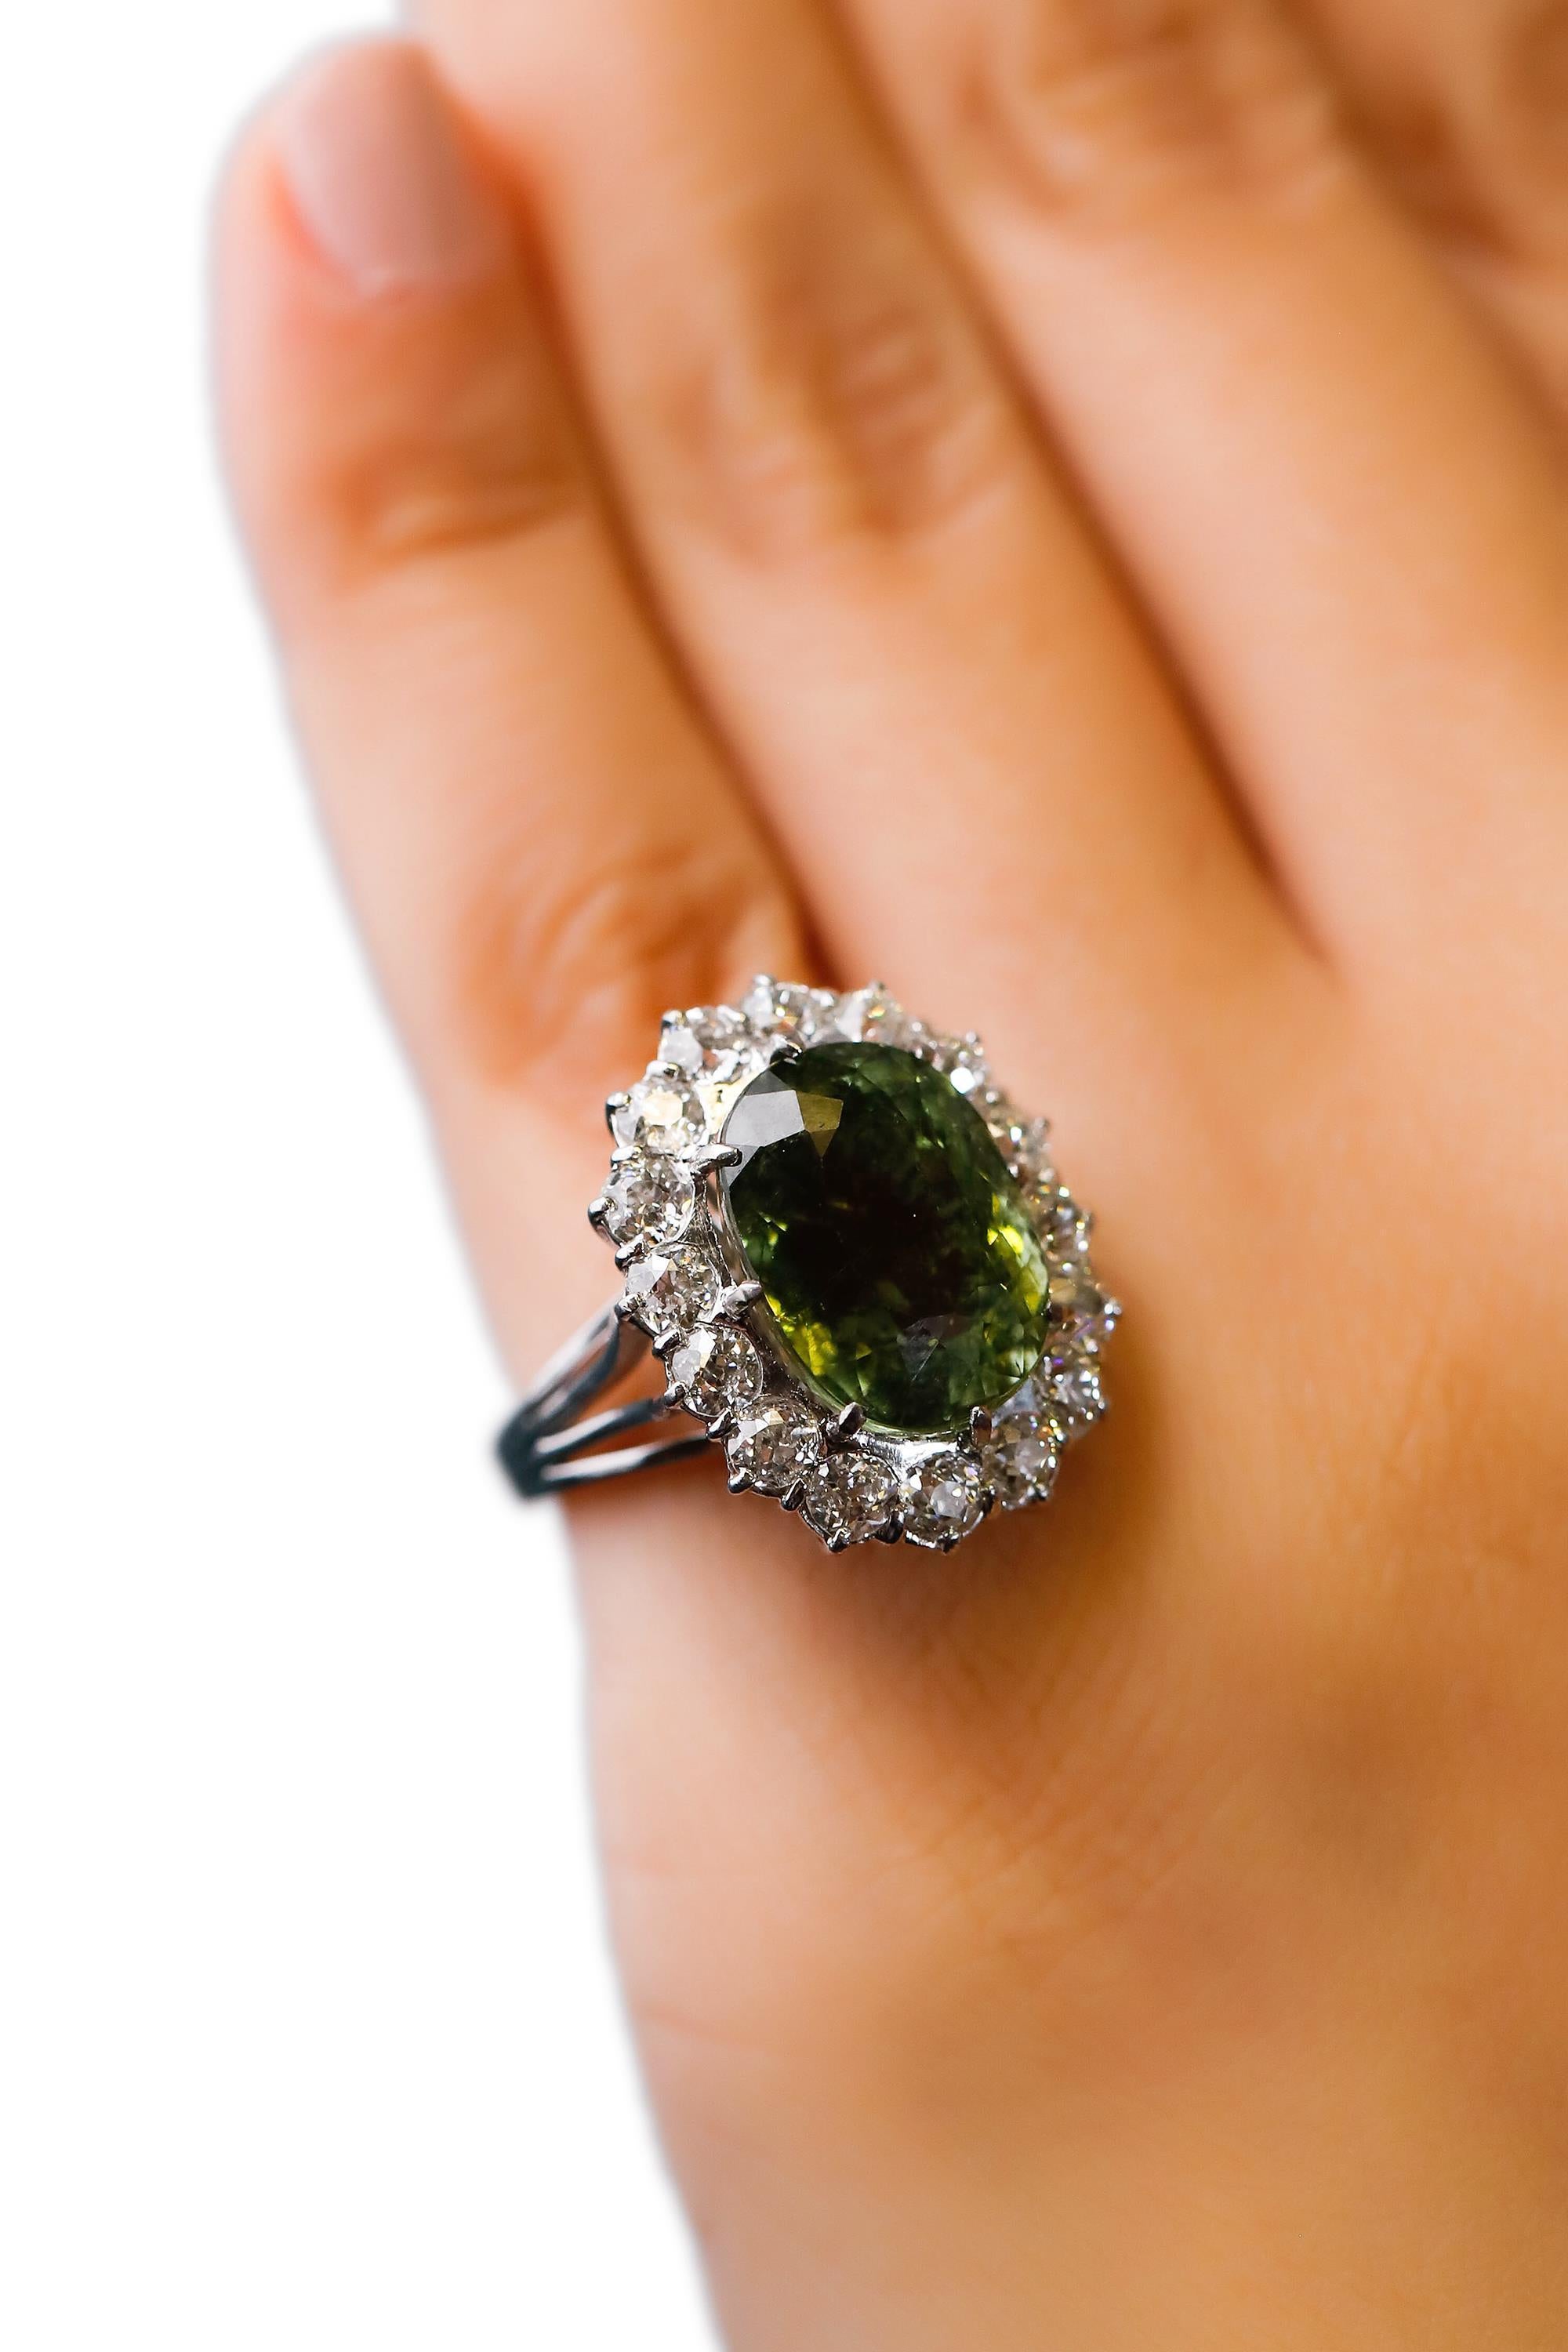 10 Carat Green Tourmaline and Diamond Ring Platinum Solitaire Cocktail Ring For Sale 1